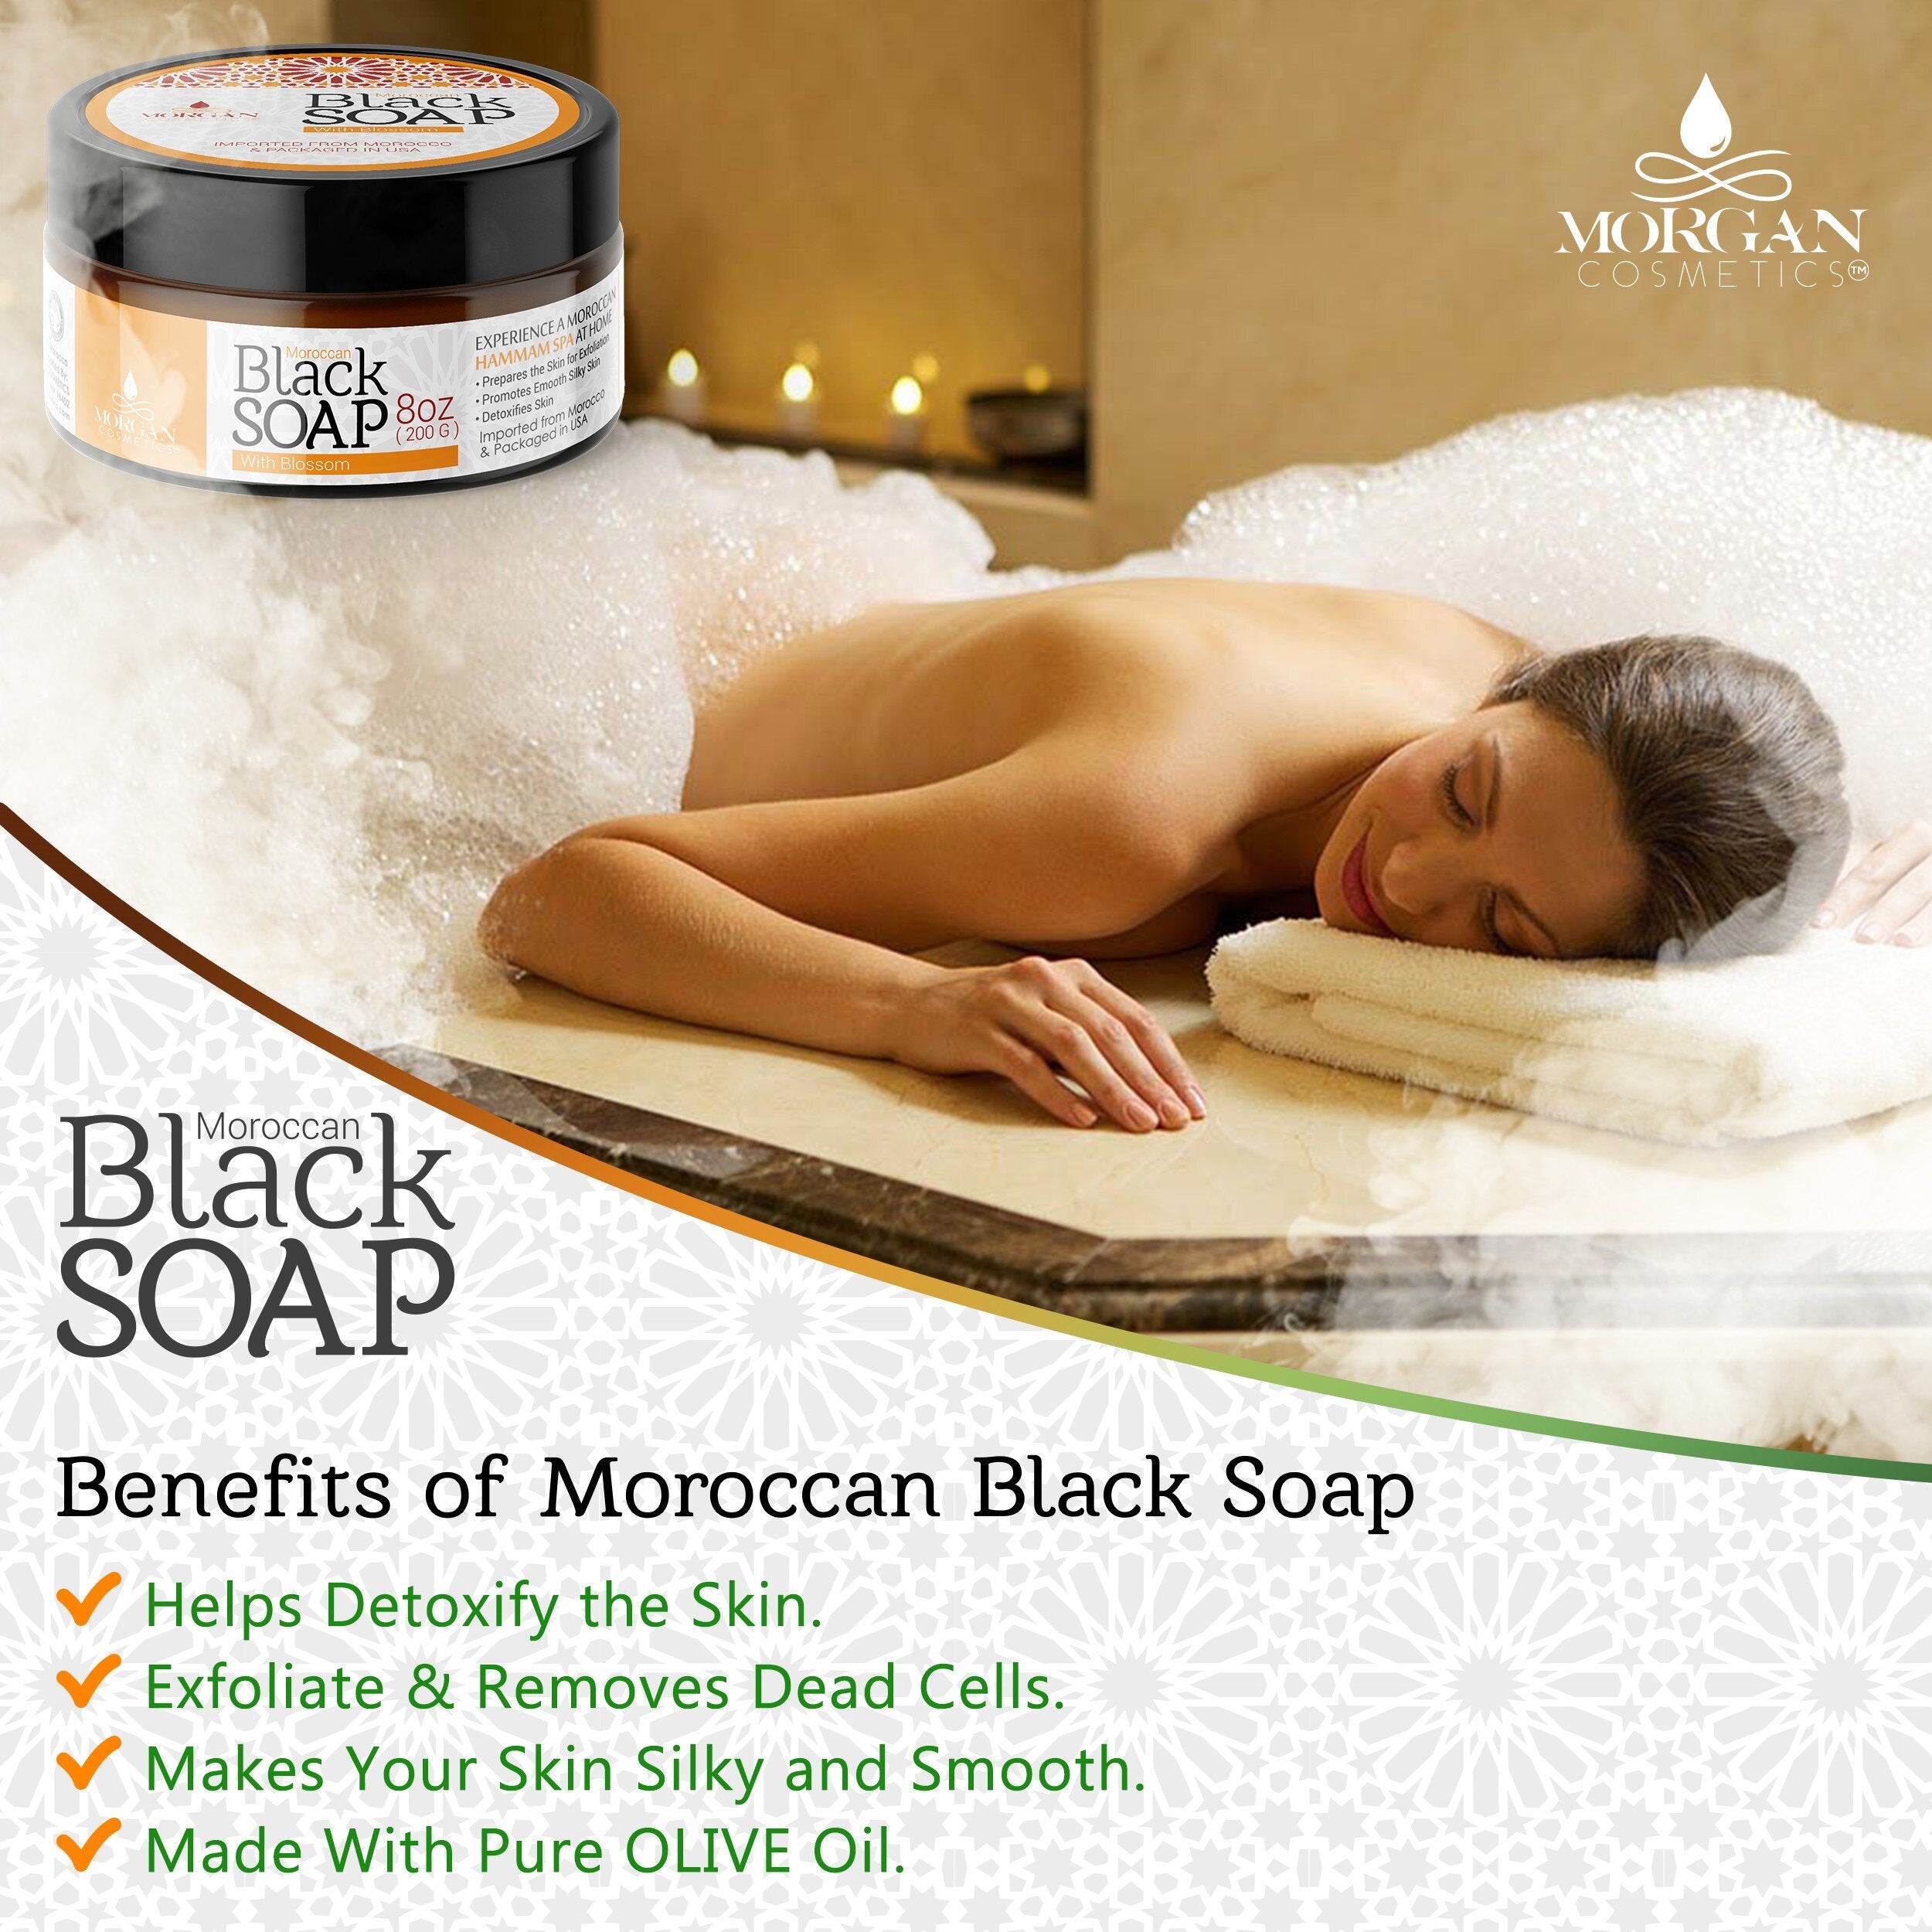 Moroccan Black Soap with Blossom 8oz freeshipping - morgancosmeticsofficial